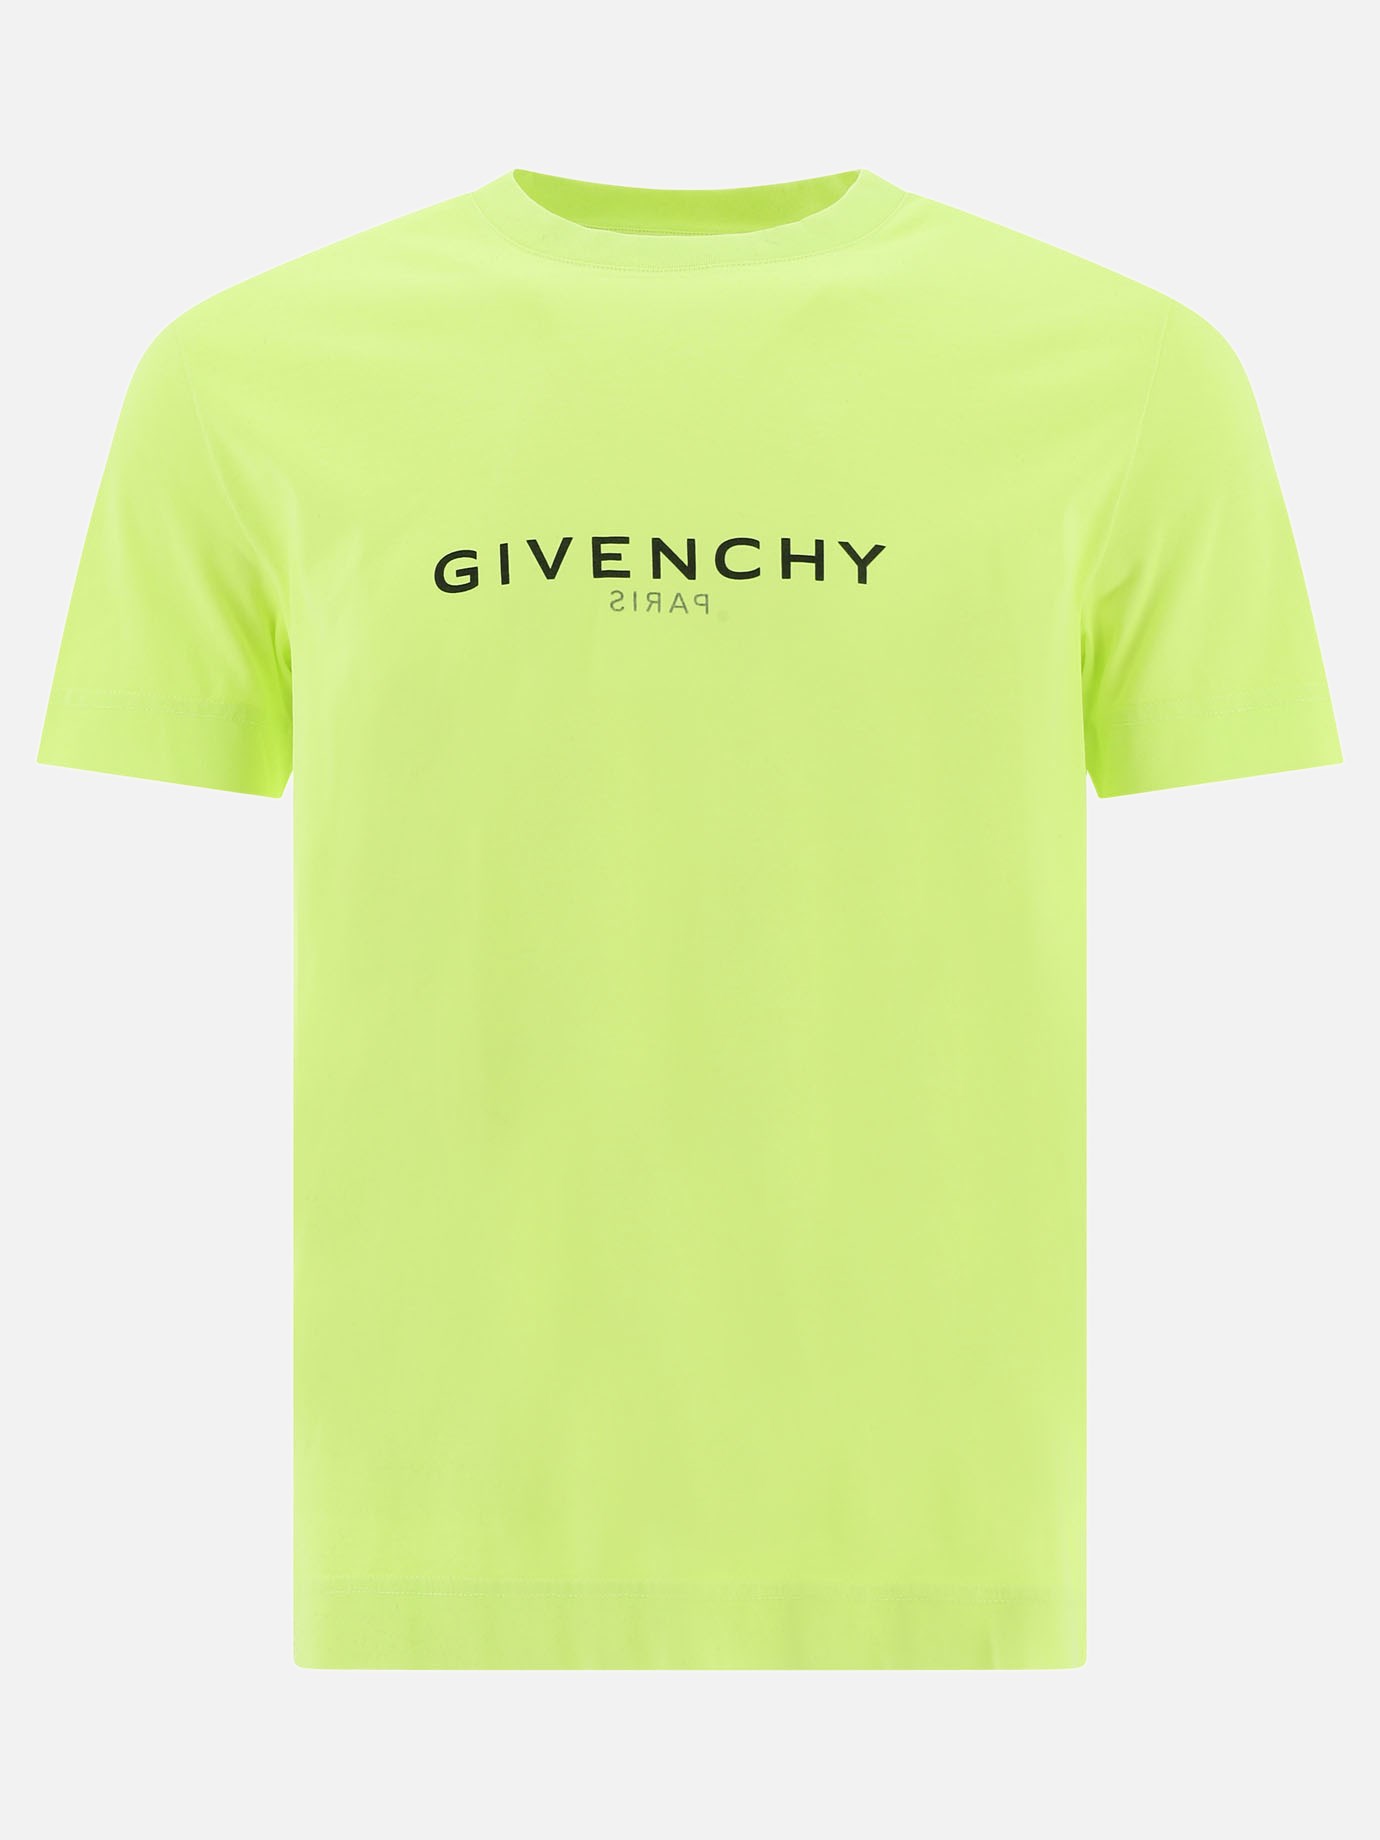  Reverse  t-shirtby Givenchy - 0